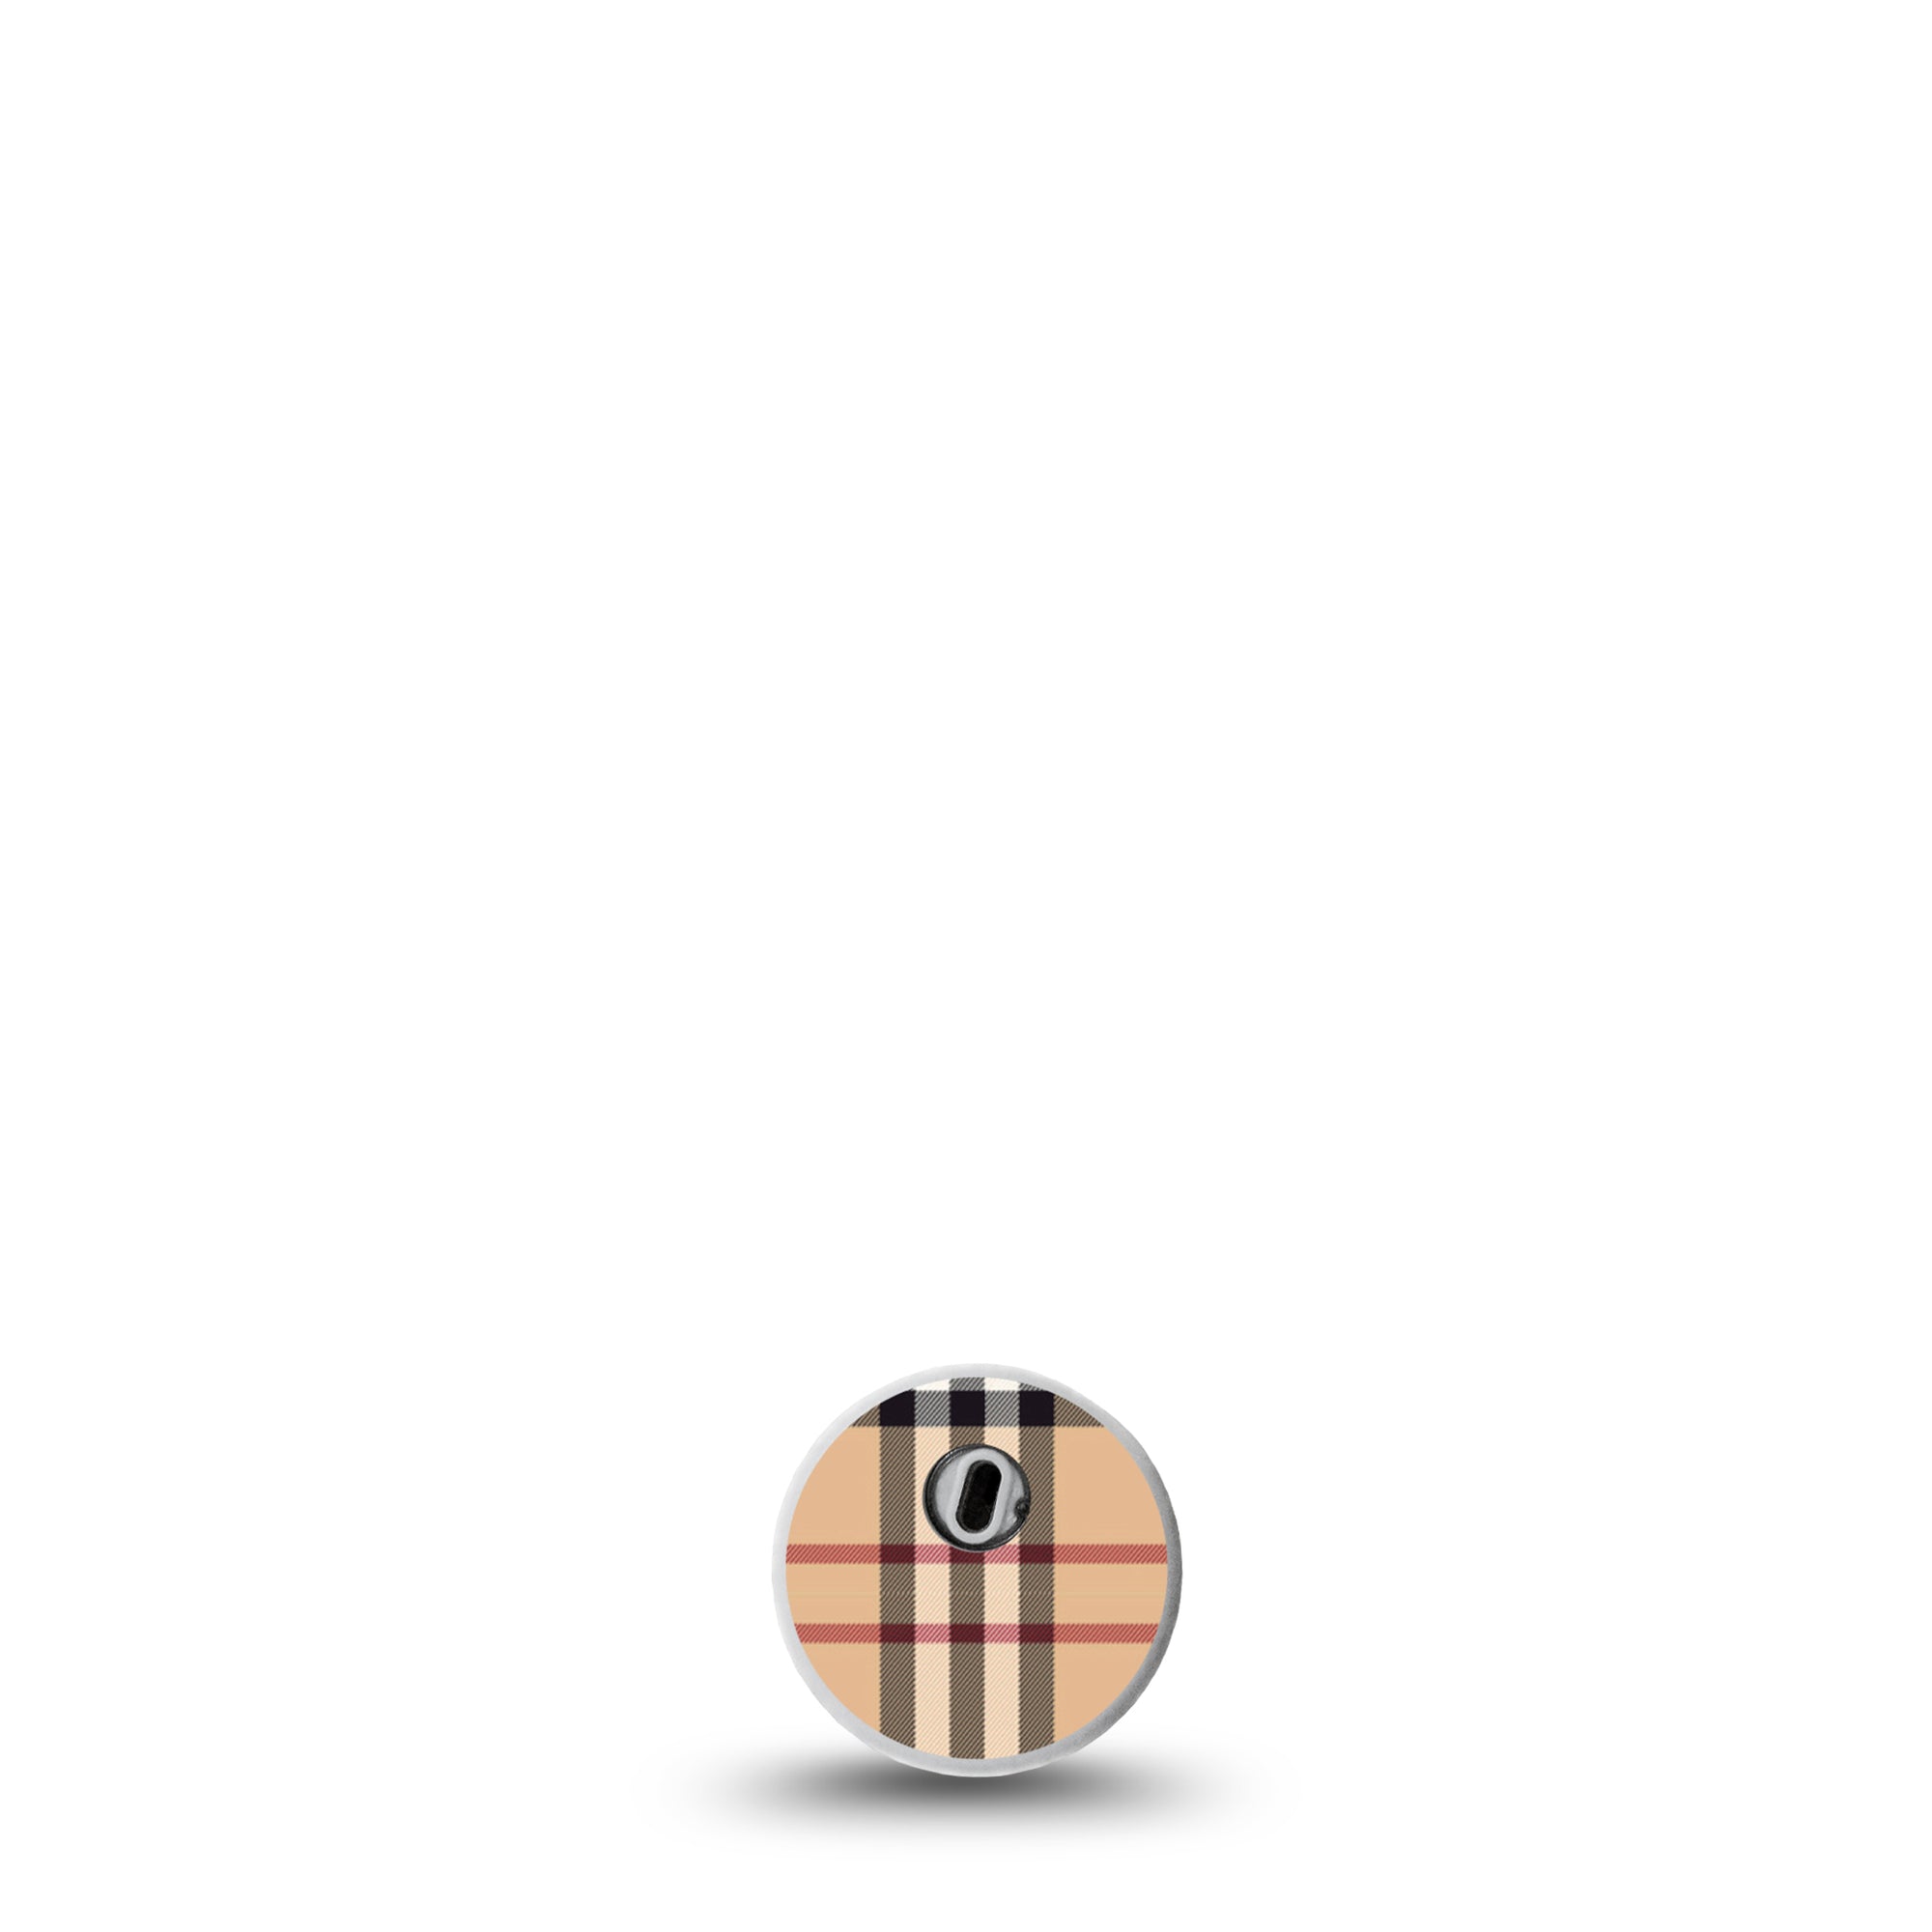 ExpressionMed Libre 3 Transmitter Sticker Classy Stripes Pattern, Brownish Checkered Themed Design - Center Sticker